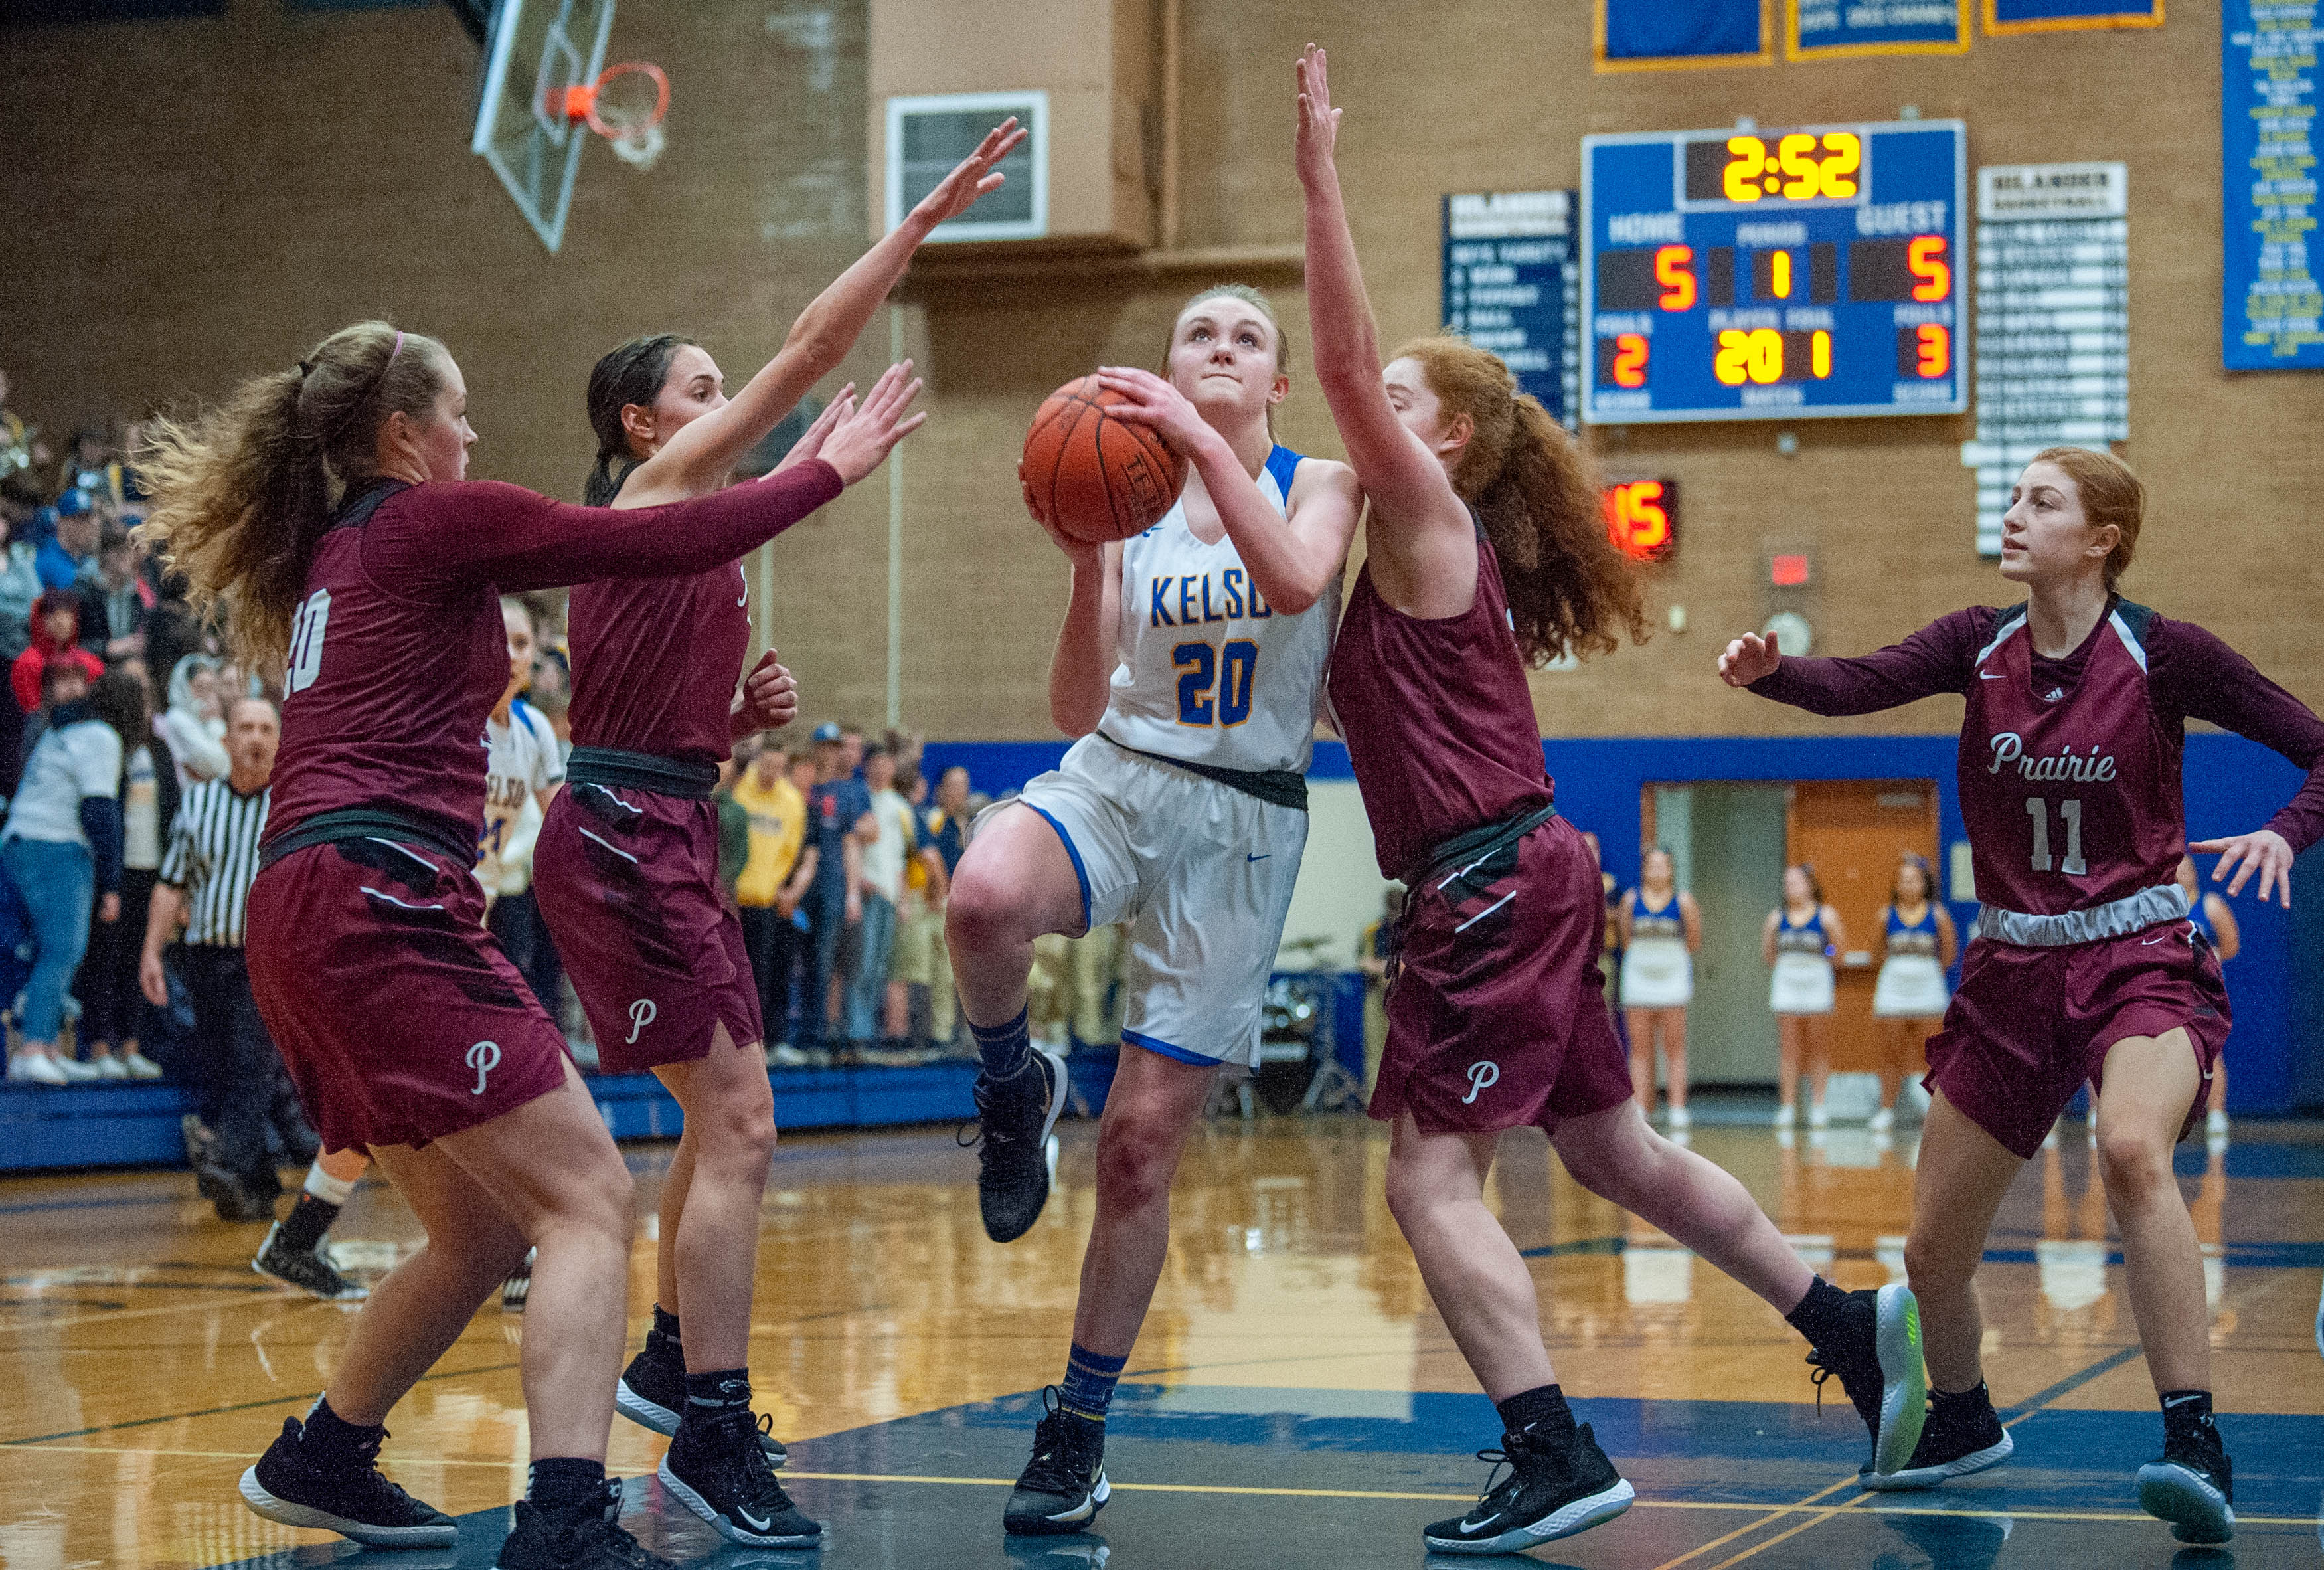 Kelso's Evermore Kaiser goes for a layup as she's swarmed by Prairie defenders during Prairie's 44-29 win in a 3A Greater St. Helens League girls basketball game Thursday in Kelso.